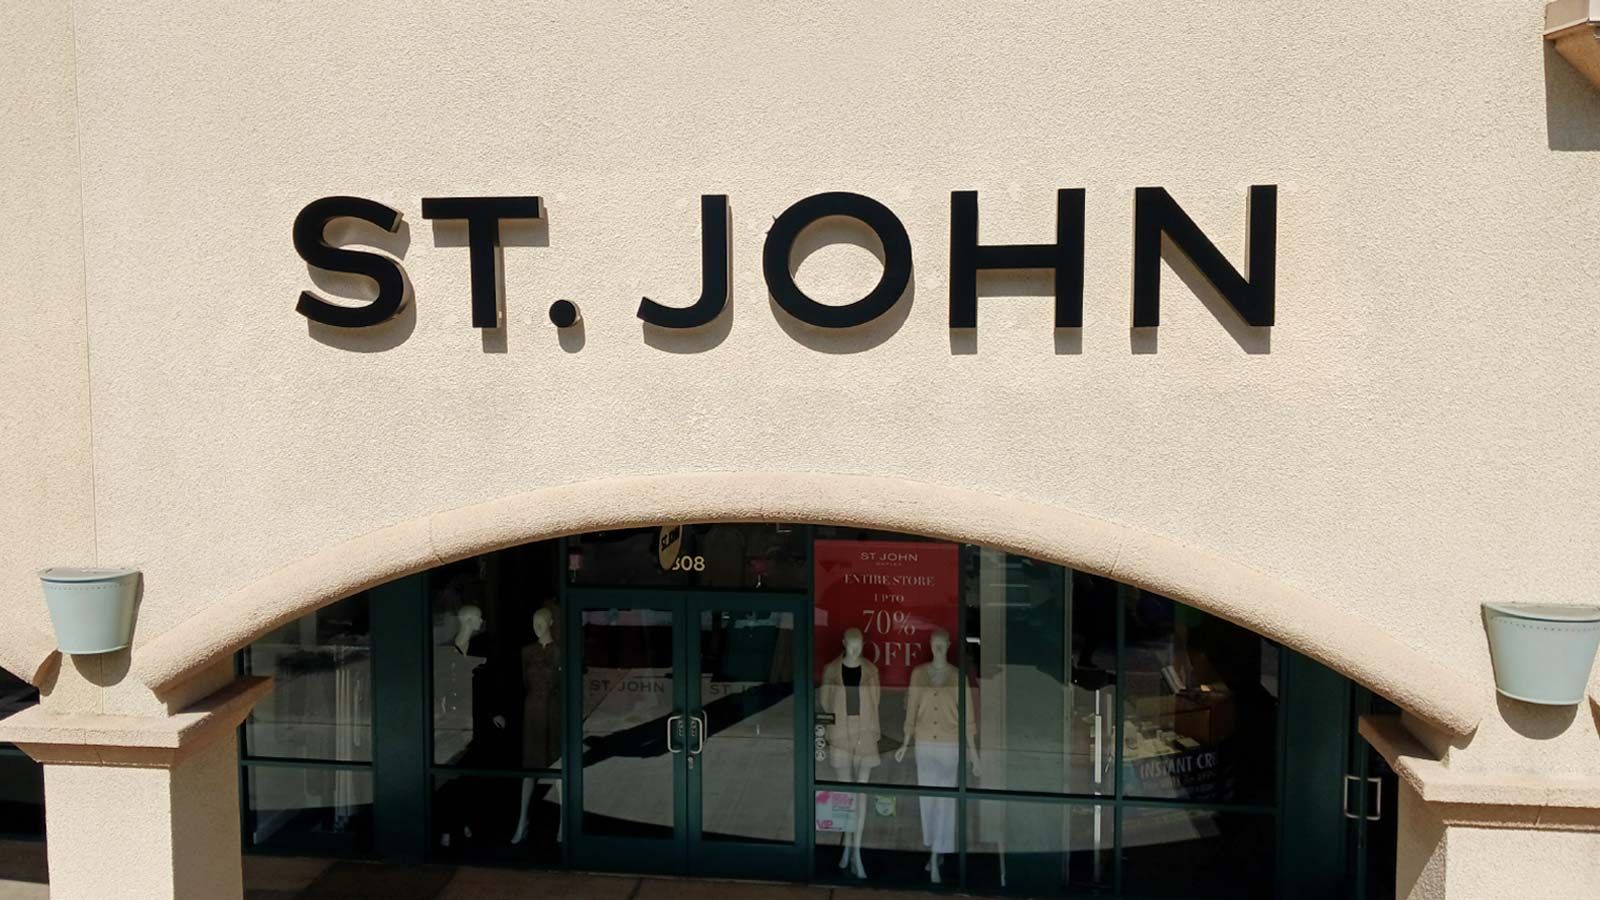 St. John backlit letters mounted on the building